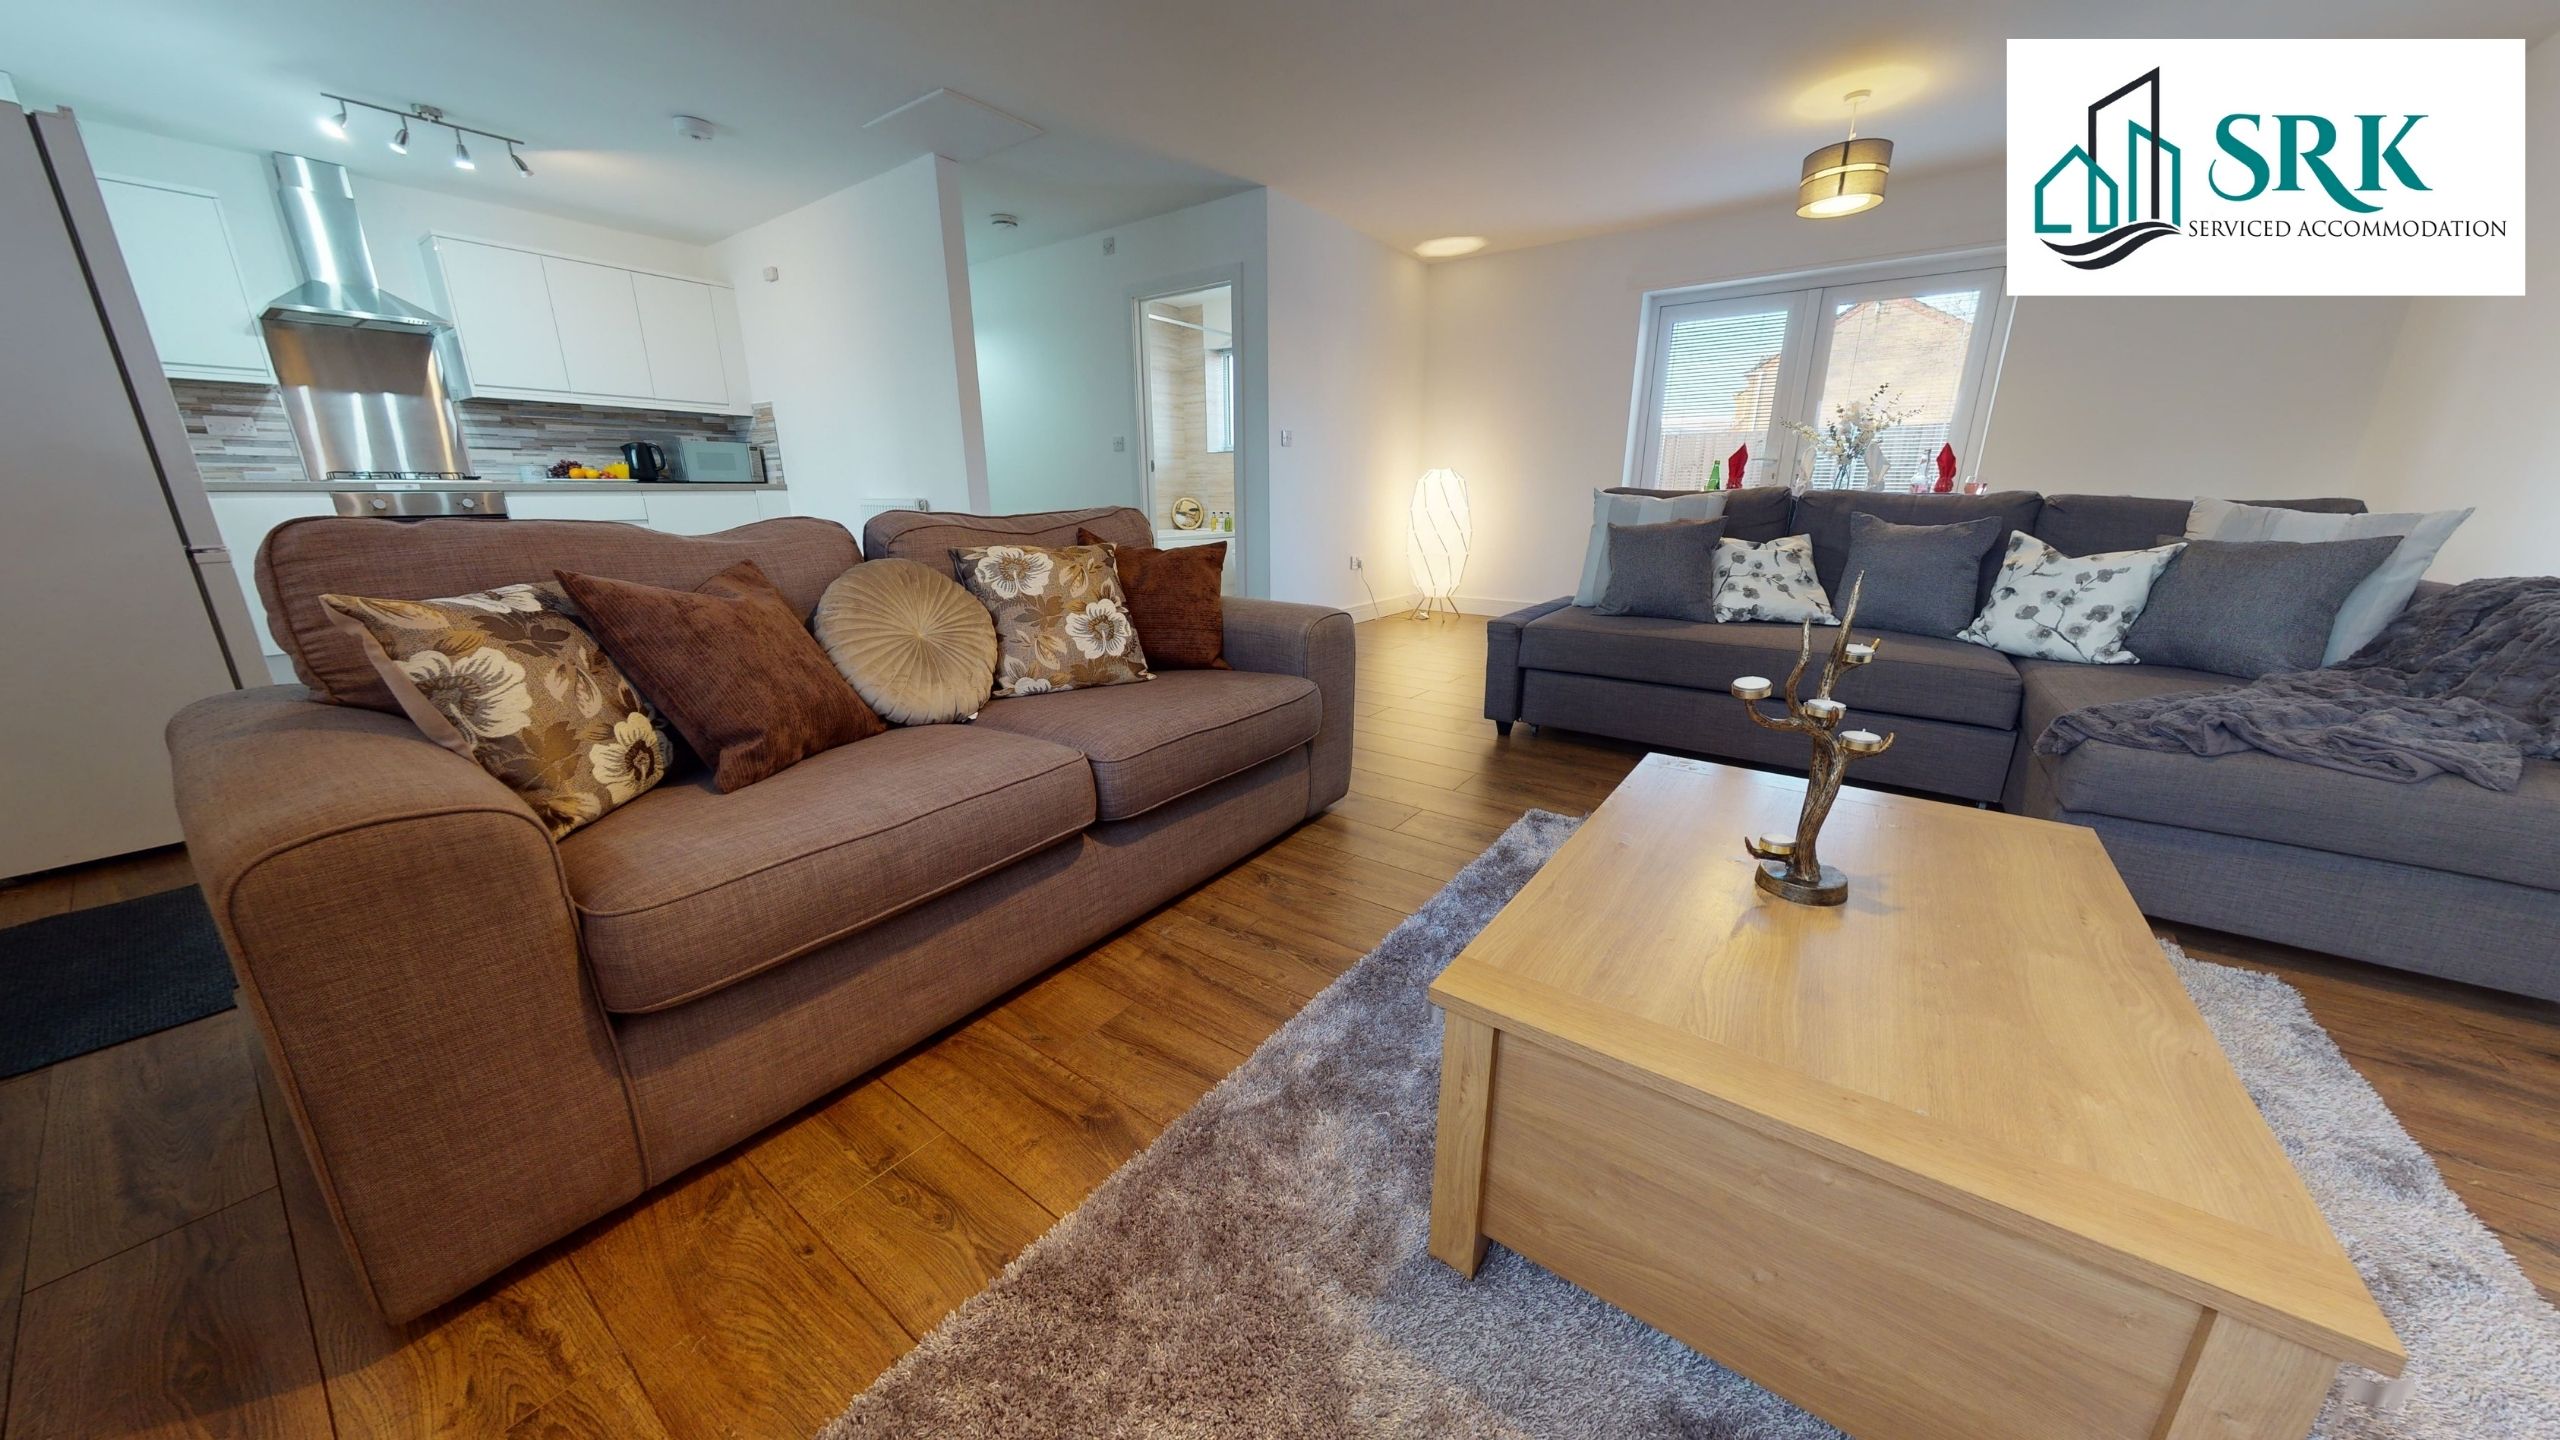 Book A Peterborough, UK Serviced Accommodation For A Corporate City Trip